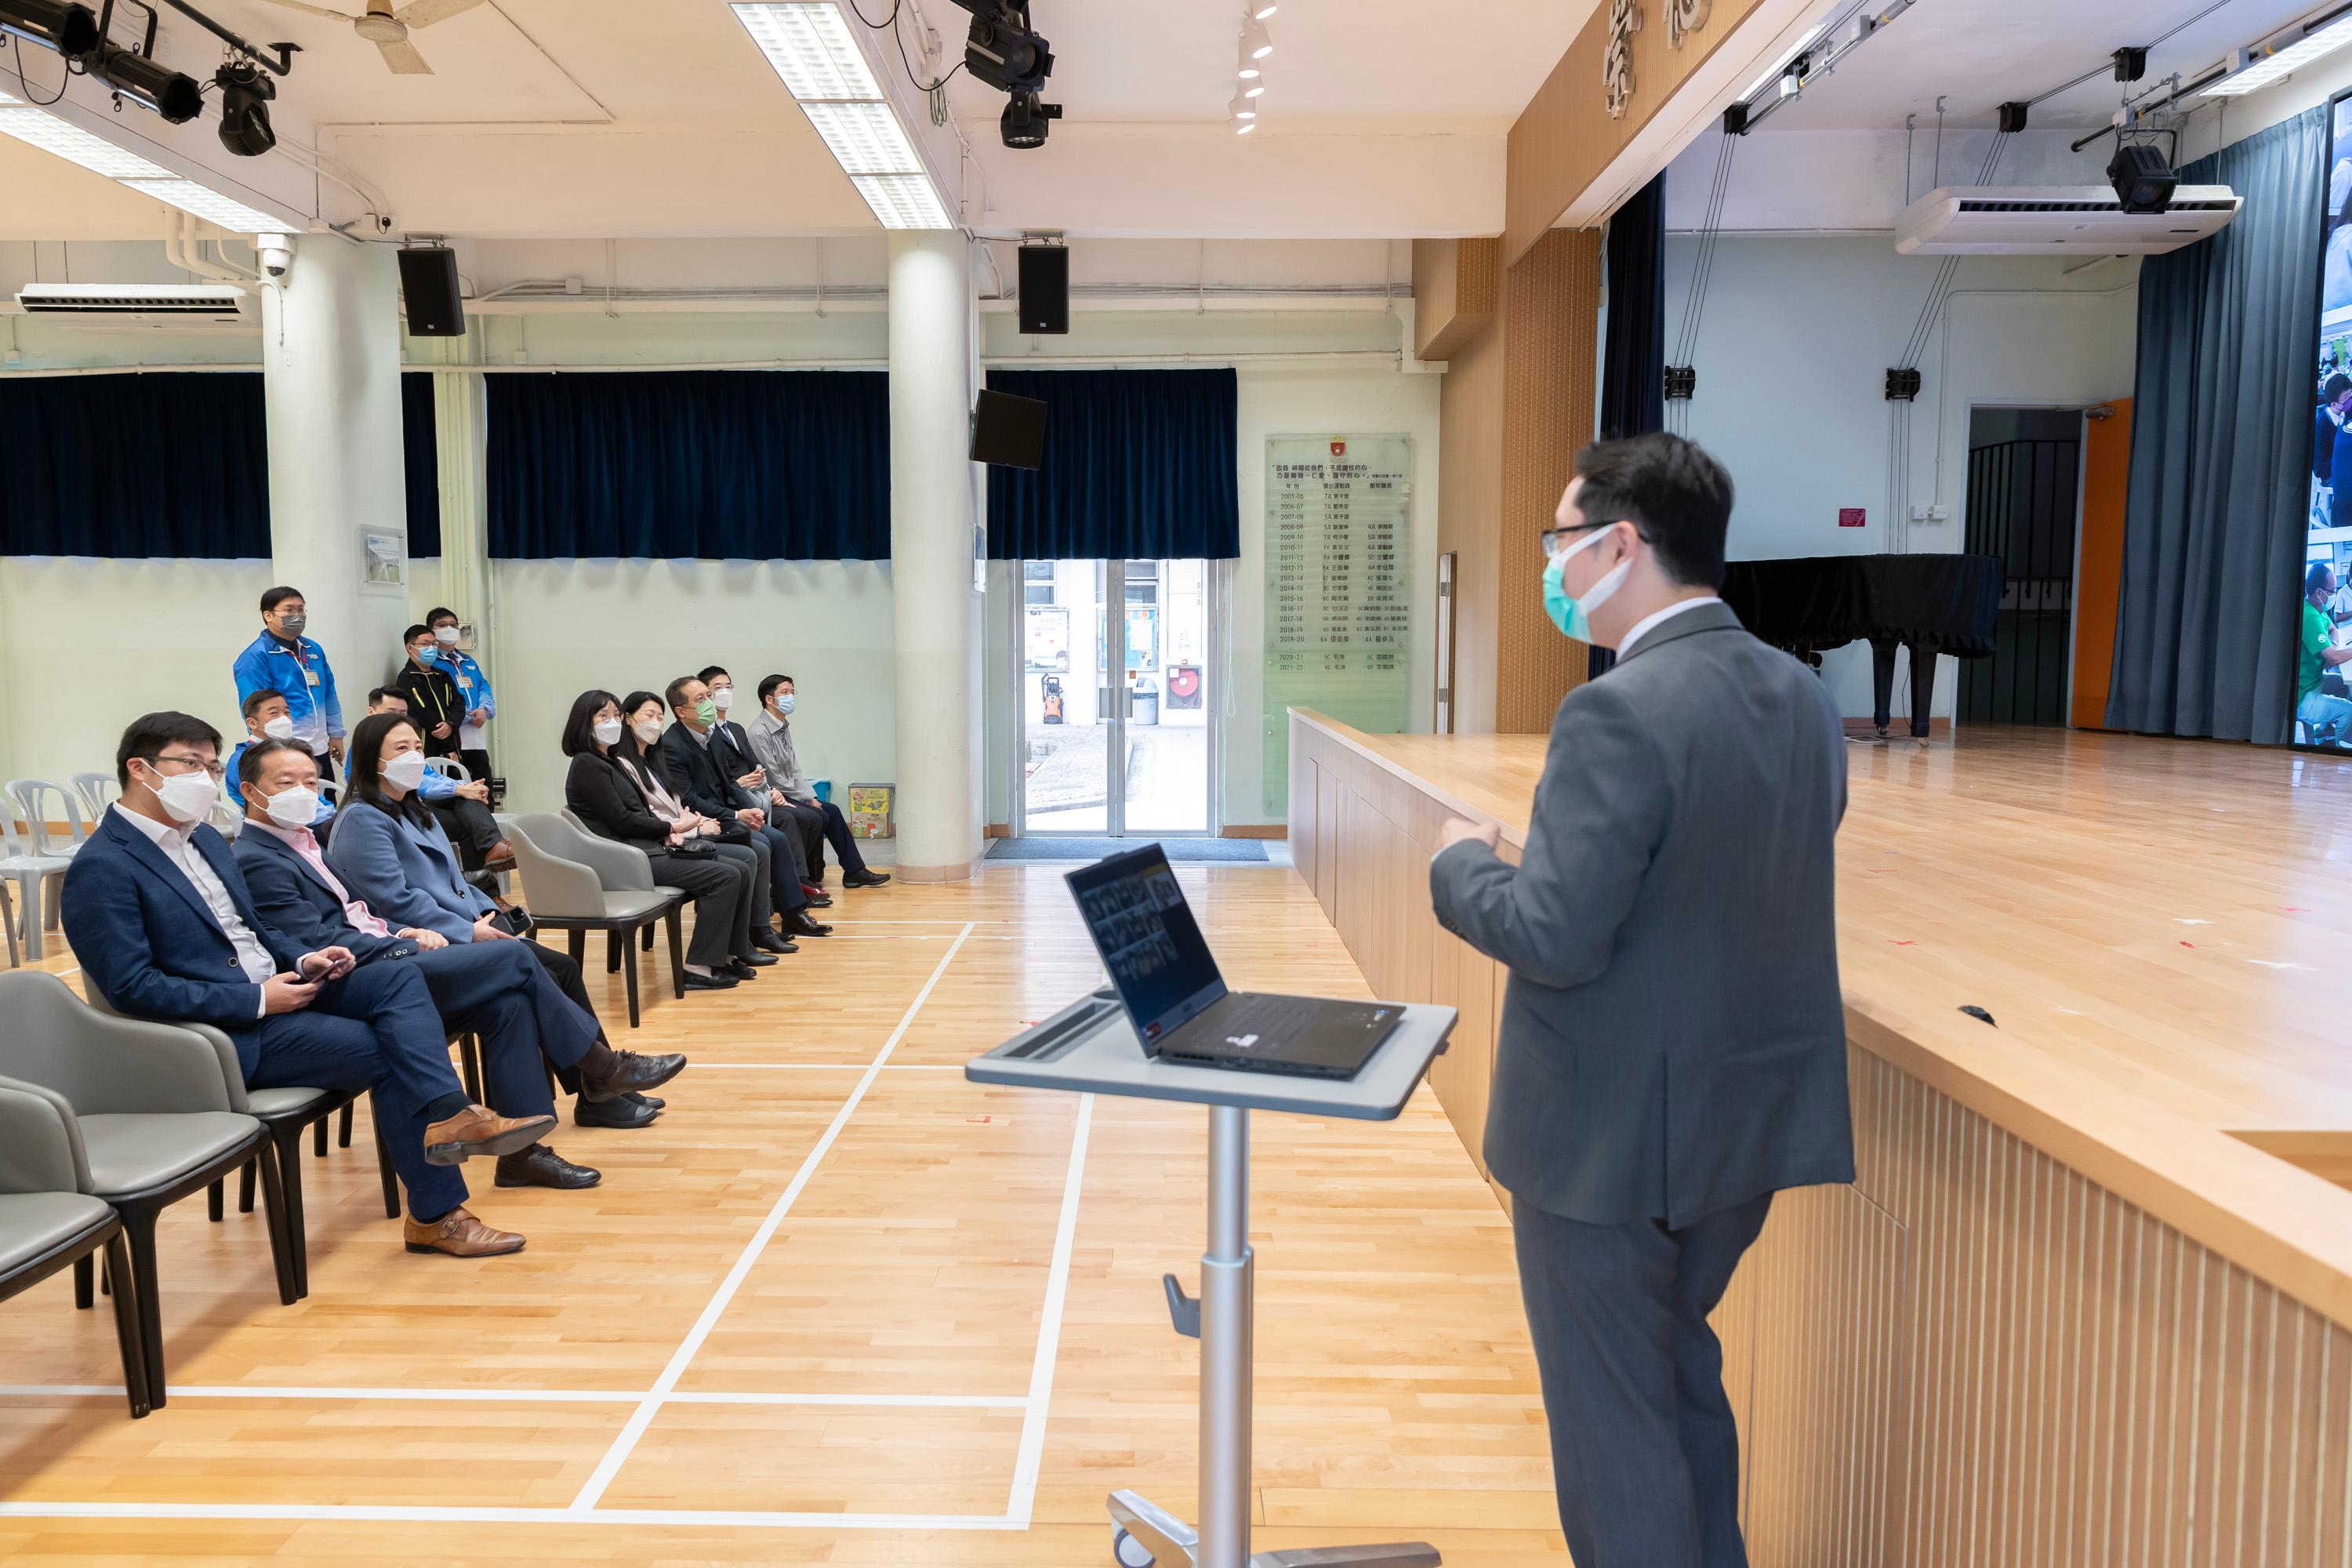 The Legislative Council Subcommittee on Matters Relating to the Development of Smart City visited the HKSKH Bishop Hall Secondary School today (February 24). Photo shows Members receiving a briefing from representatives of the school on the overview of its STEAM education.